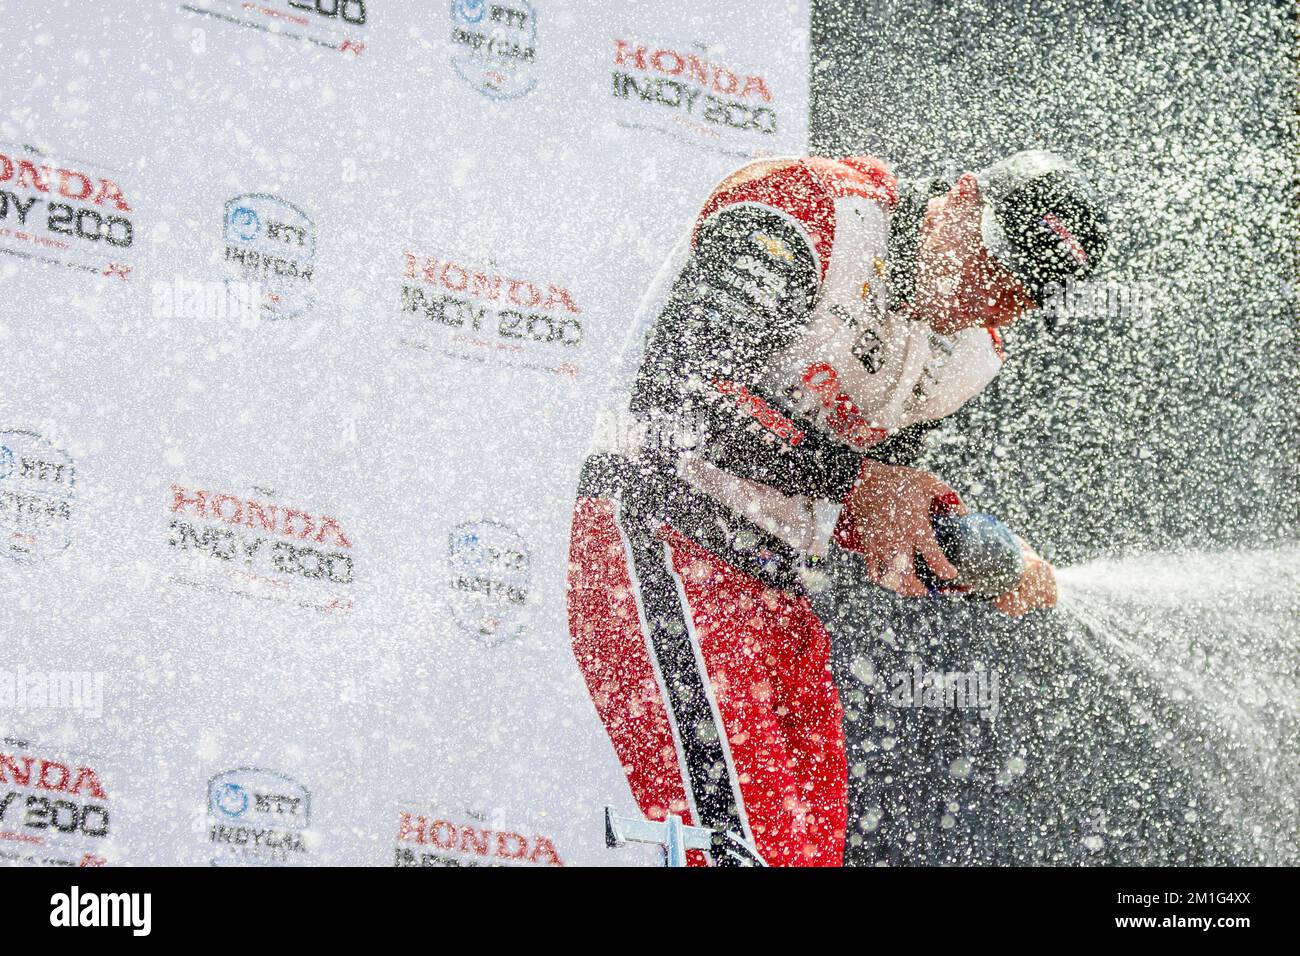 SCOTT MCLAUGHLIN (3) of Christchurch, New Zealand wins the Honda Indy 200 at Mid Ohio Sports Car Course in Lexington, OH, USA. Stock Photo